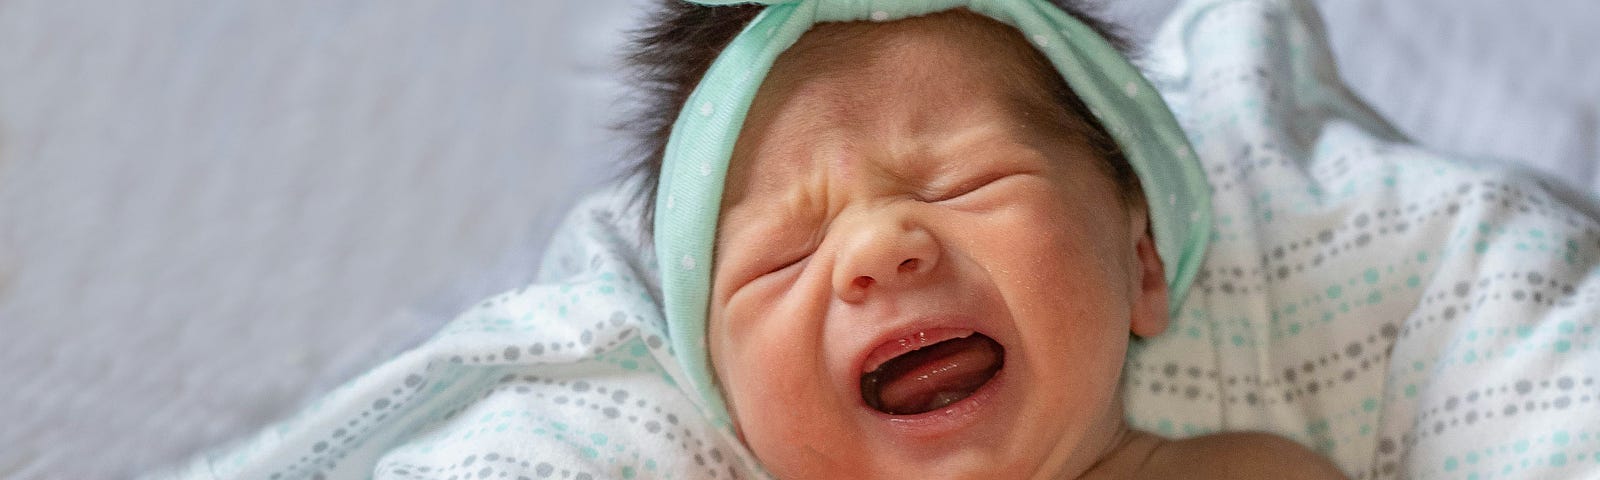 Image of crying baby